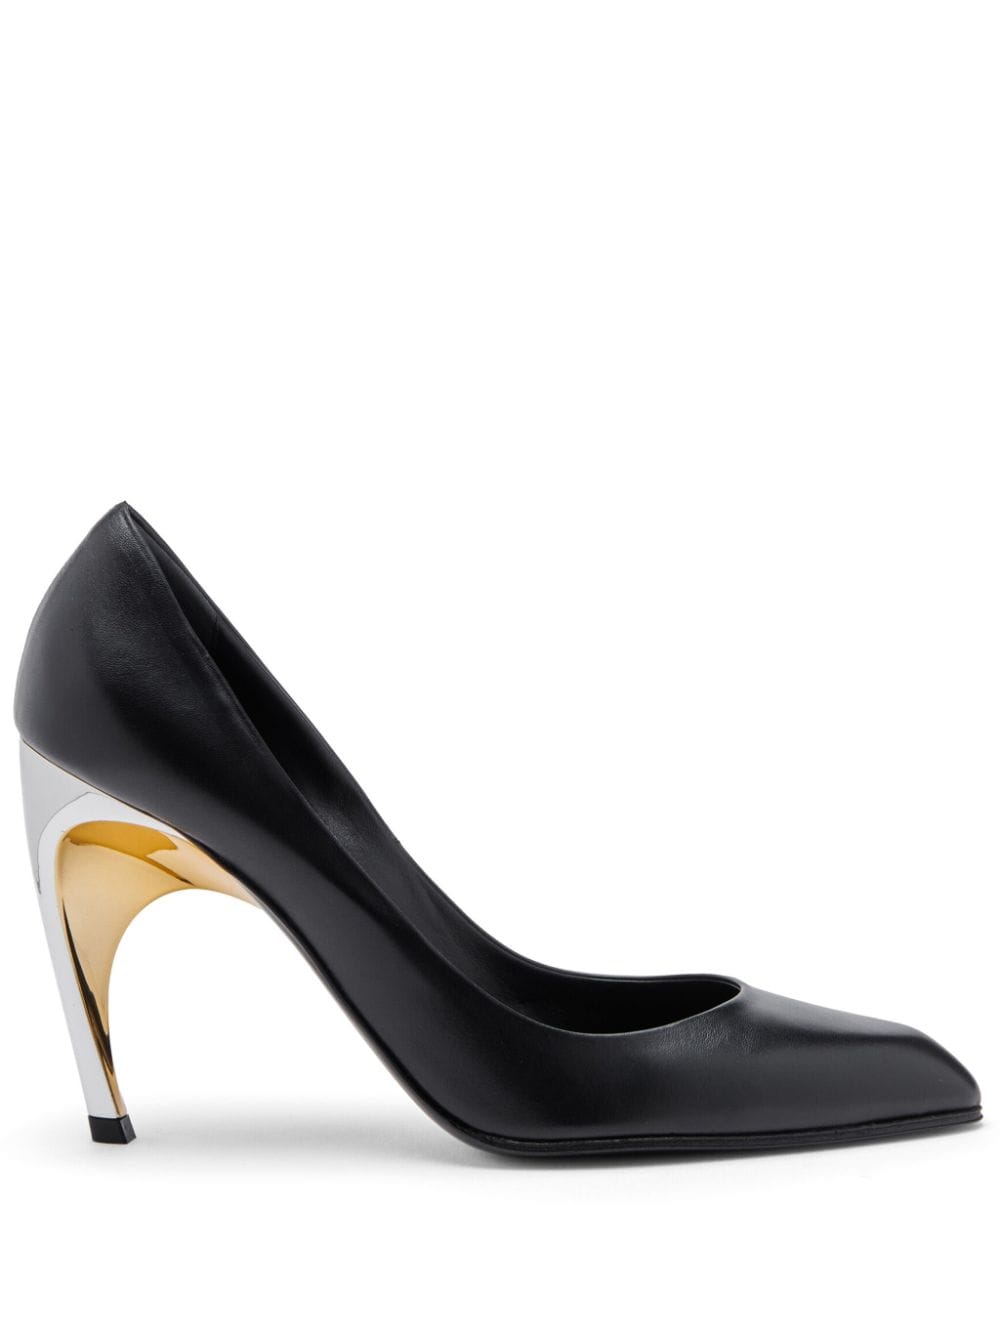 Image 1 of Alexander McQueen Armadillo 95mm leather pumps